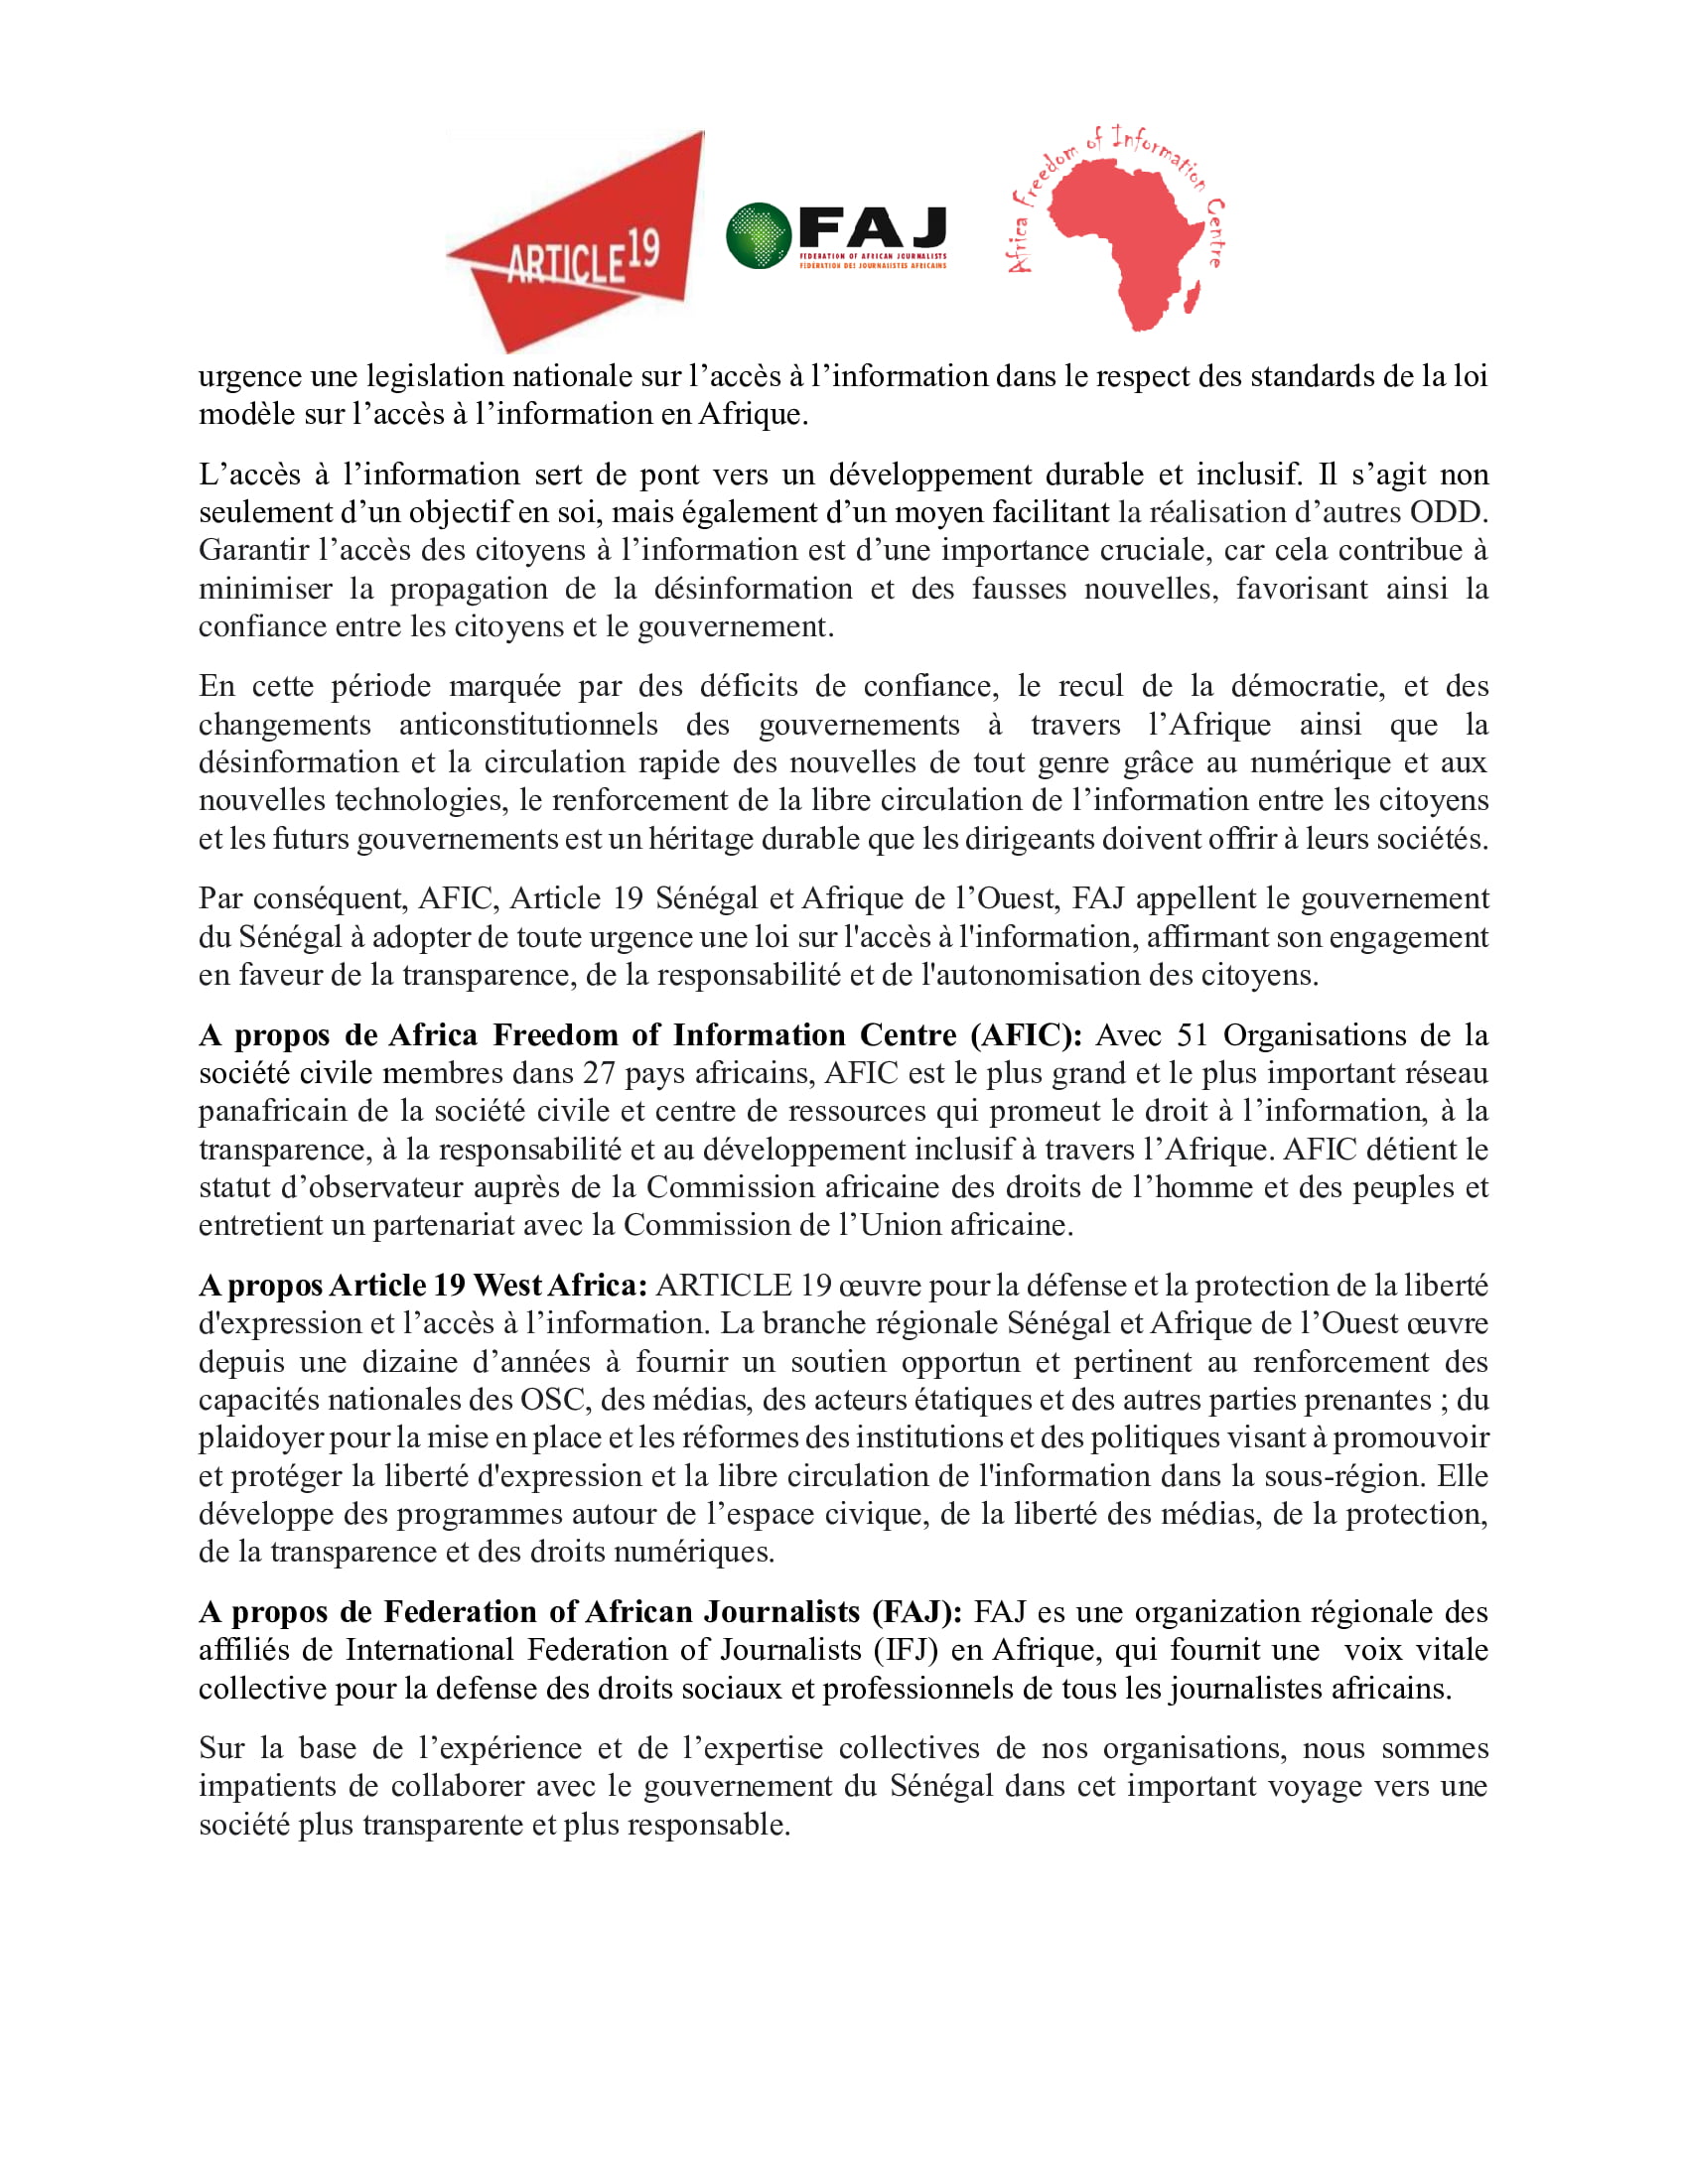 AFIC, Article 19, Federation of African Journalist send a letter to the President of Senegal